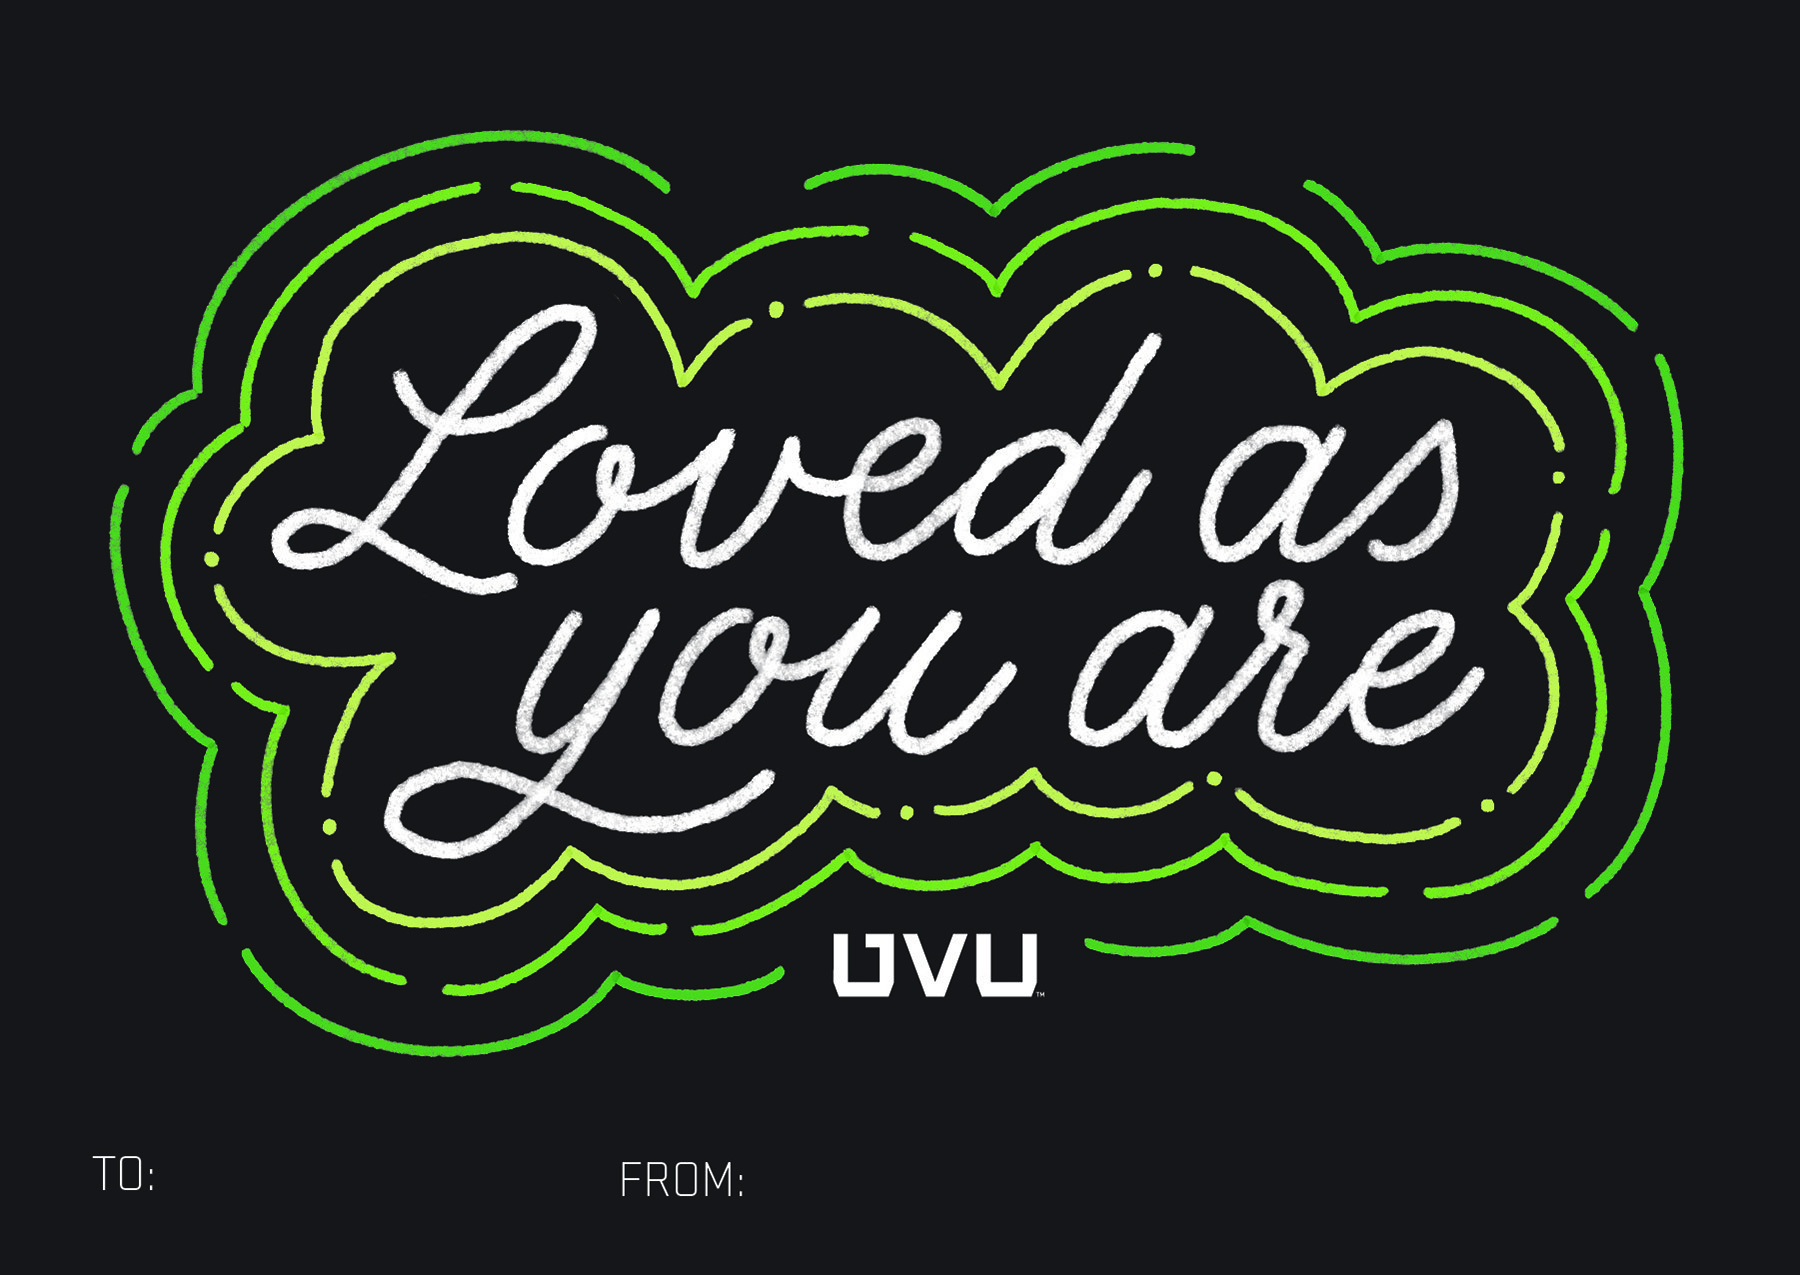 "Loved as you are" postcard